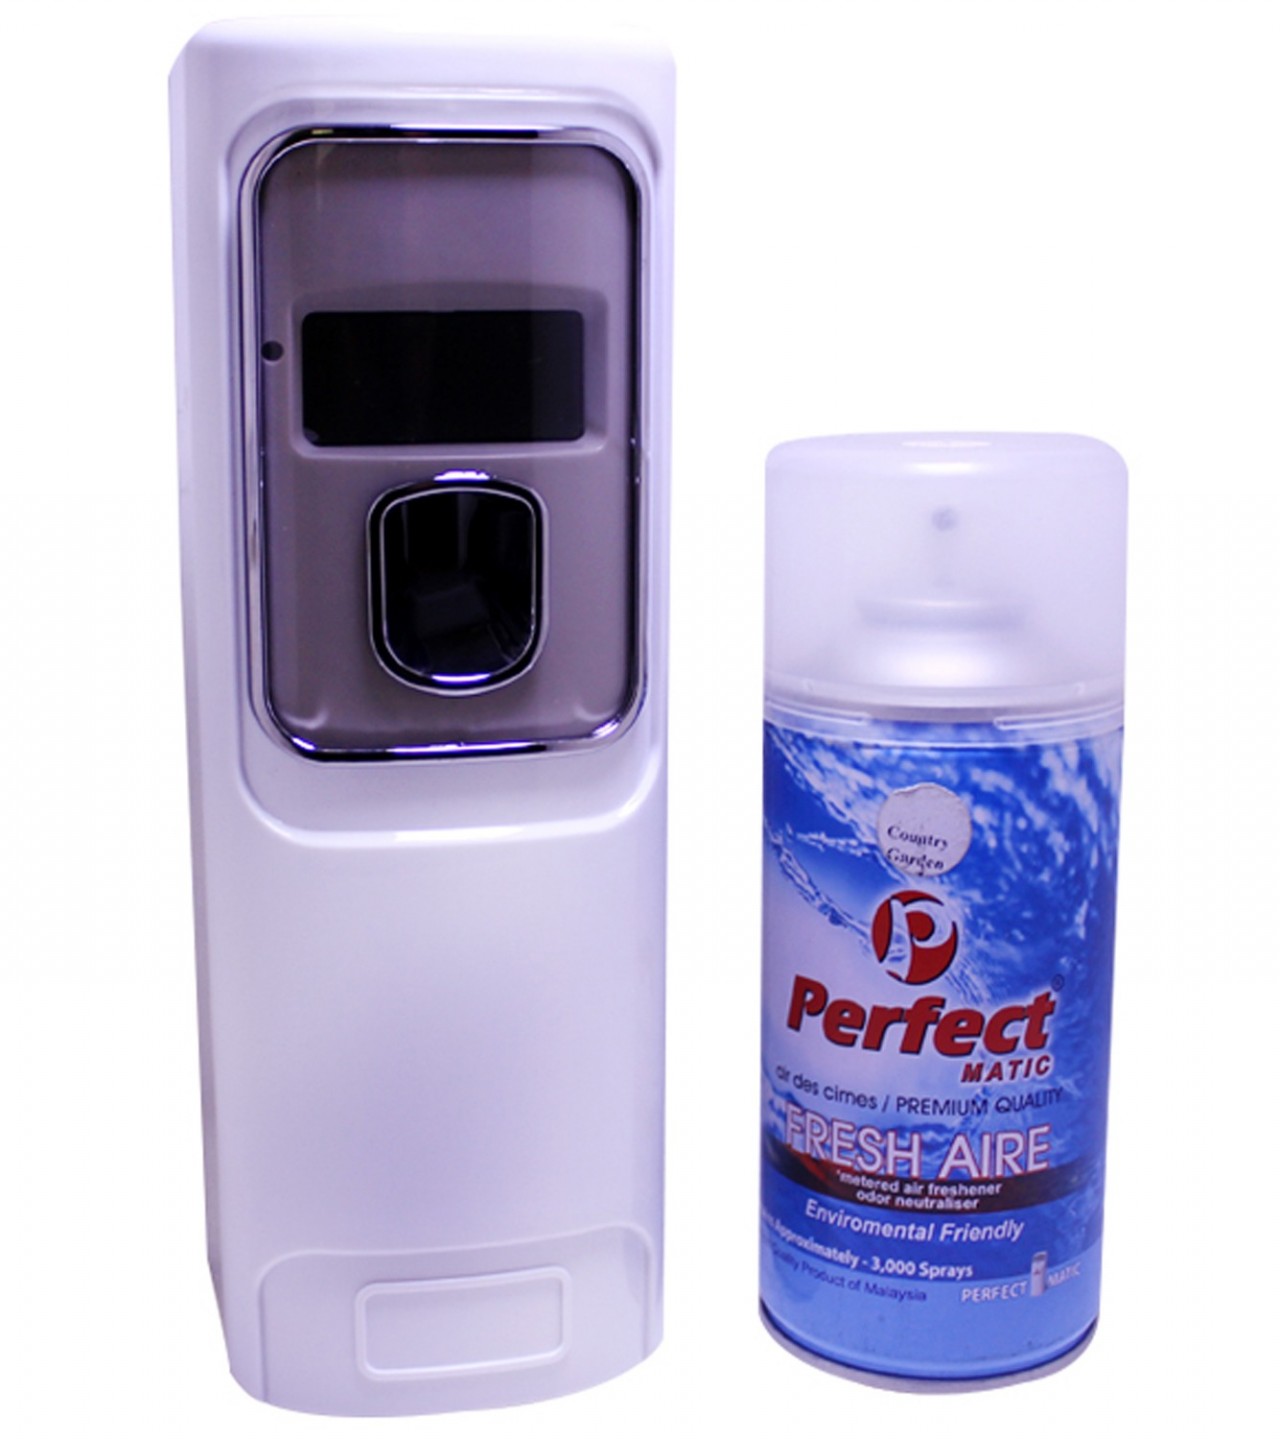 Automatic LCD Display Air Freshener Dispenser with Free Perfect Matic Refill – 300 ml Bottle